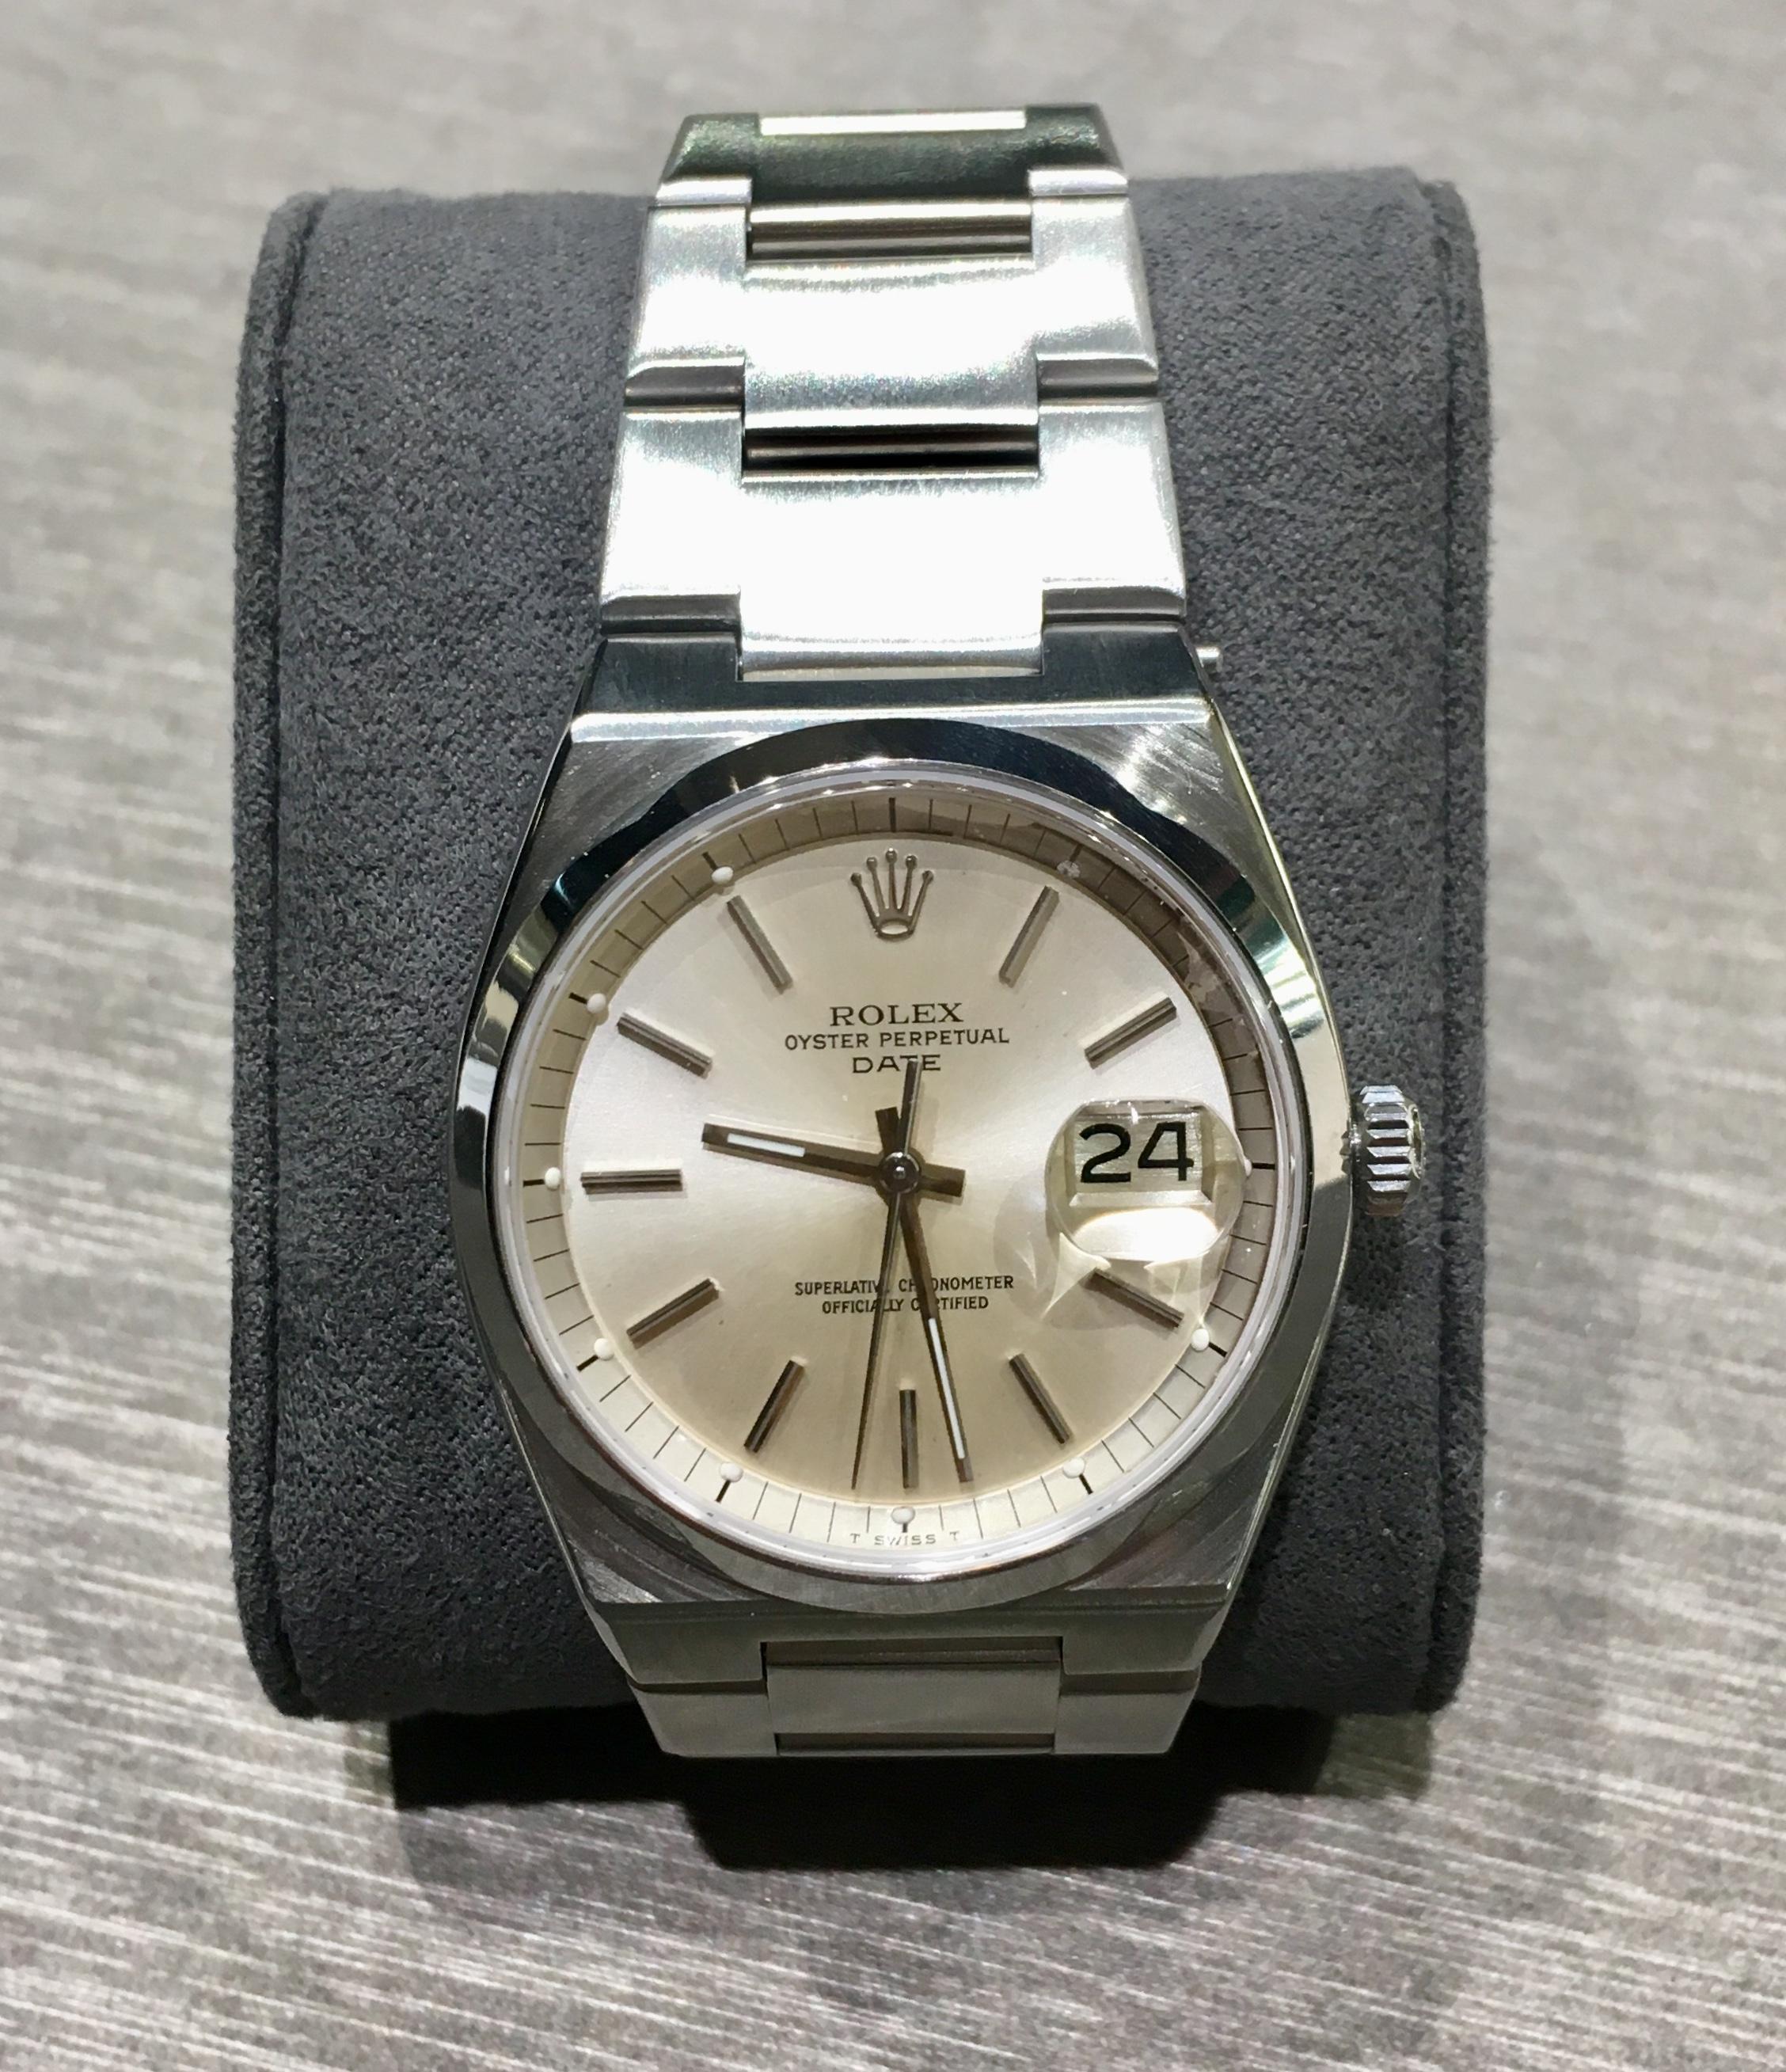 Rolex Stainless Steel Datejust Oyster Perpetual wristwatch Ref 1530, circa 1976 For Sale 1